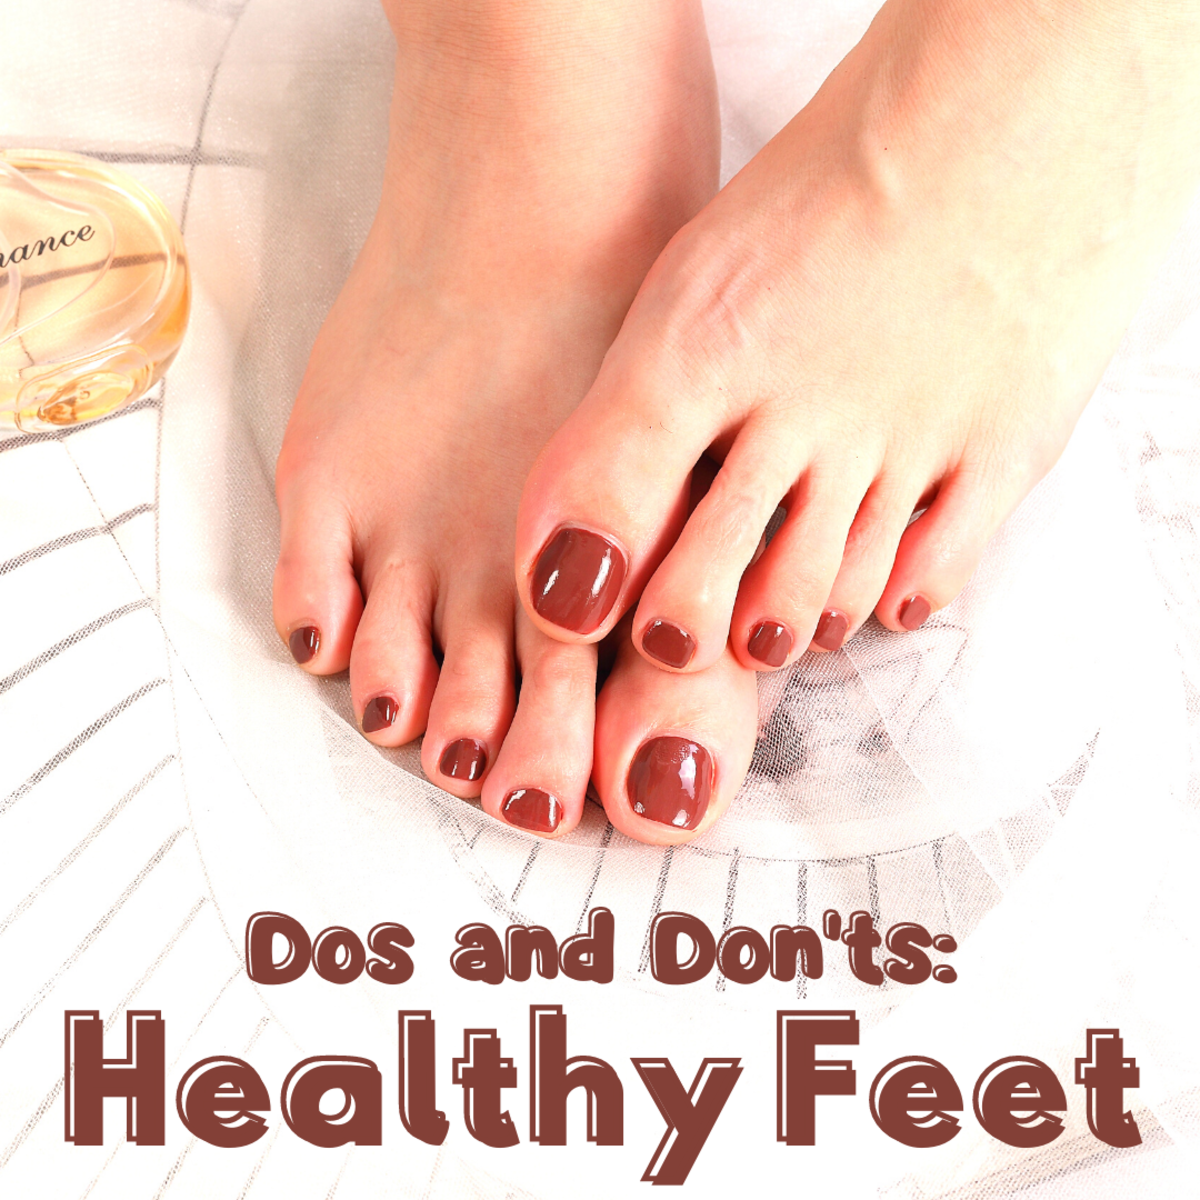 Your feet deserve excellent care—here are some dos and don'ts for keeping them soft and happy.